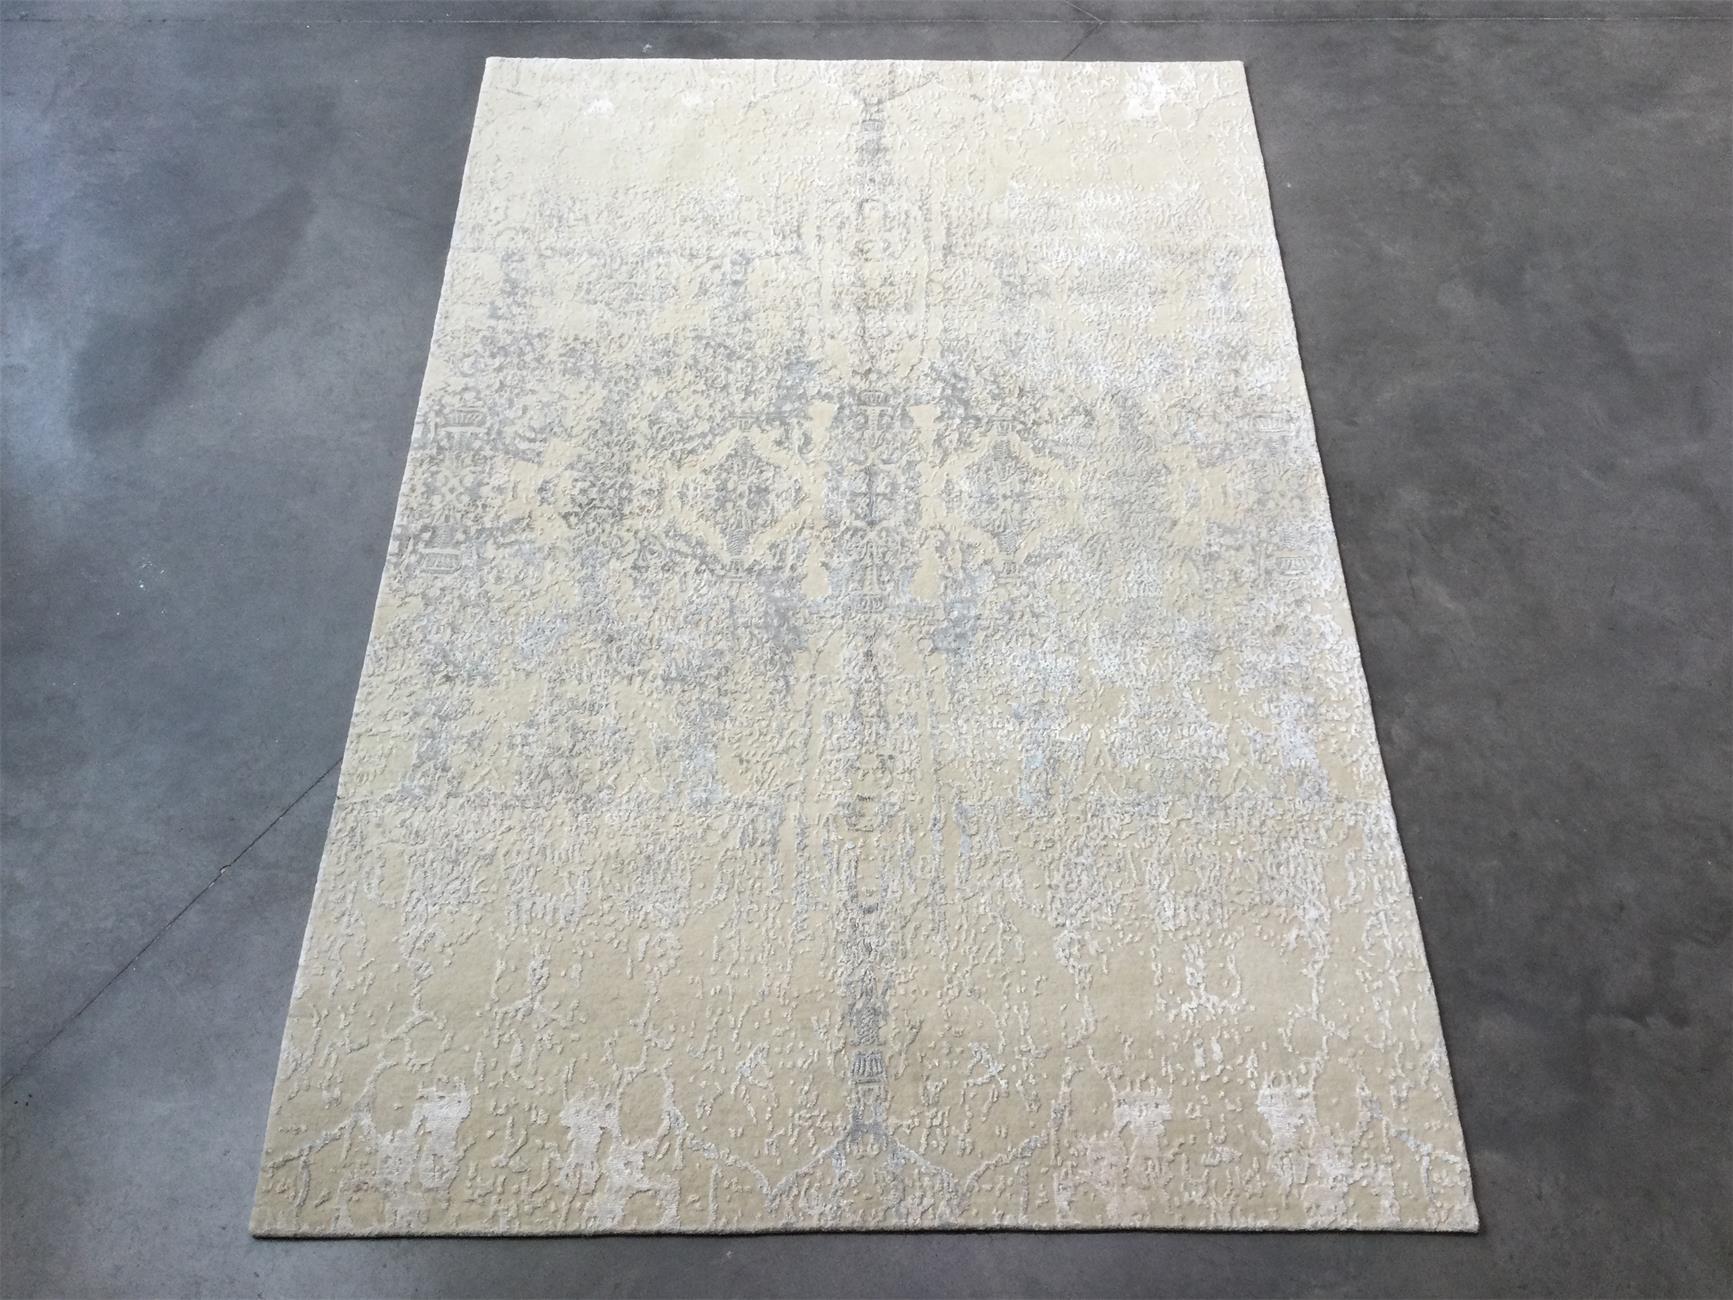 Contemporary rug belonging to our Abstract Collection. Measures: 3.00 x 2.00 m.
- Handmade in silk and wool in the artisan workshops of the Zigler firm.
- Incredible mix between the old and the contemporary.
- Silk designs with a wool structure that